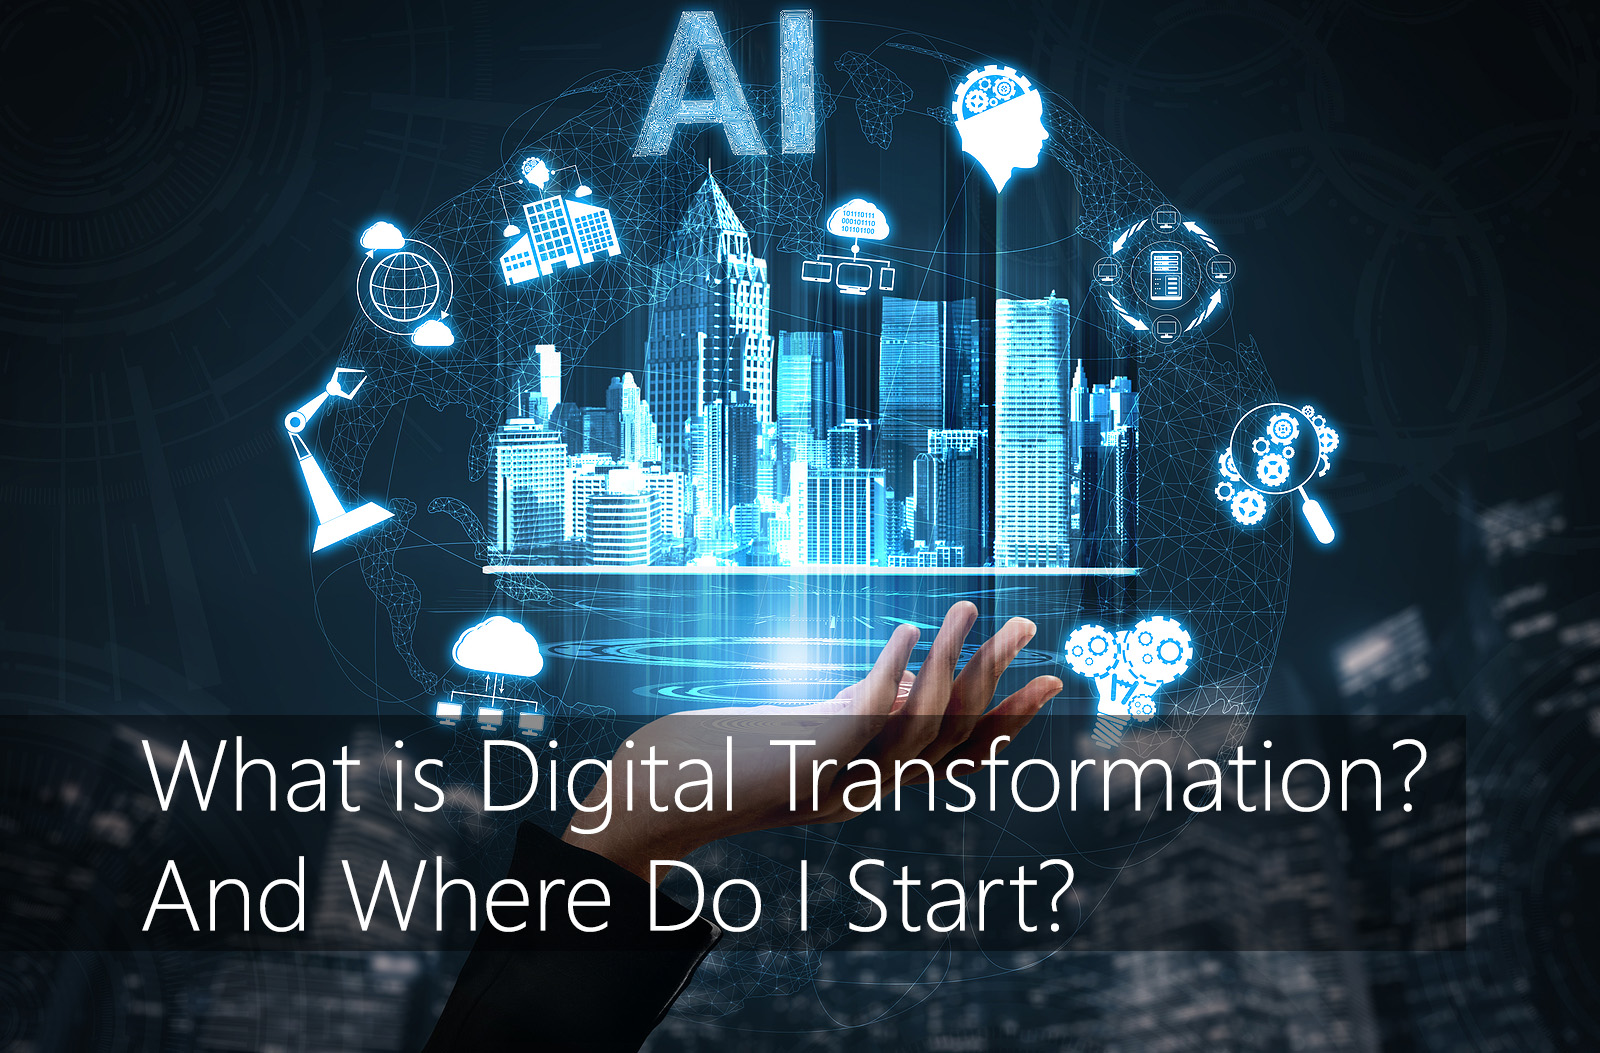 tmc-blog-what-is-digital-transformation-and-where-do-i-start